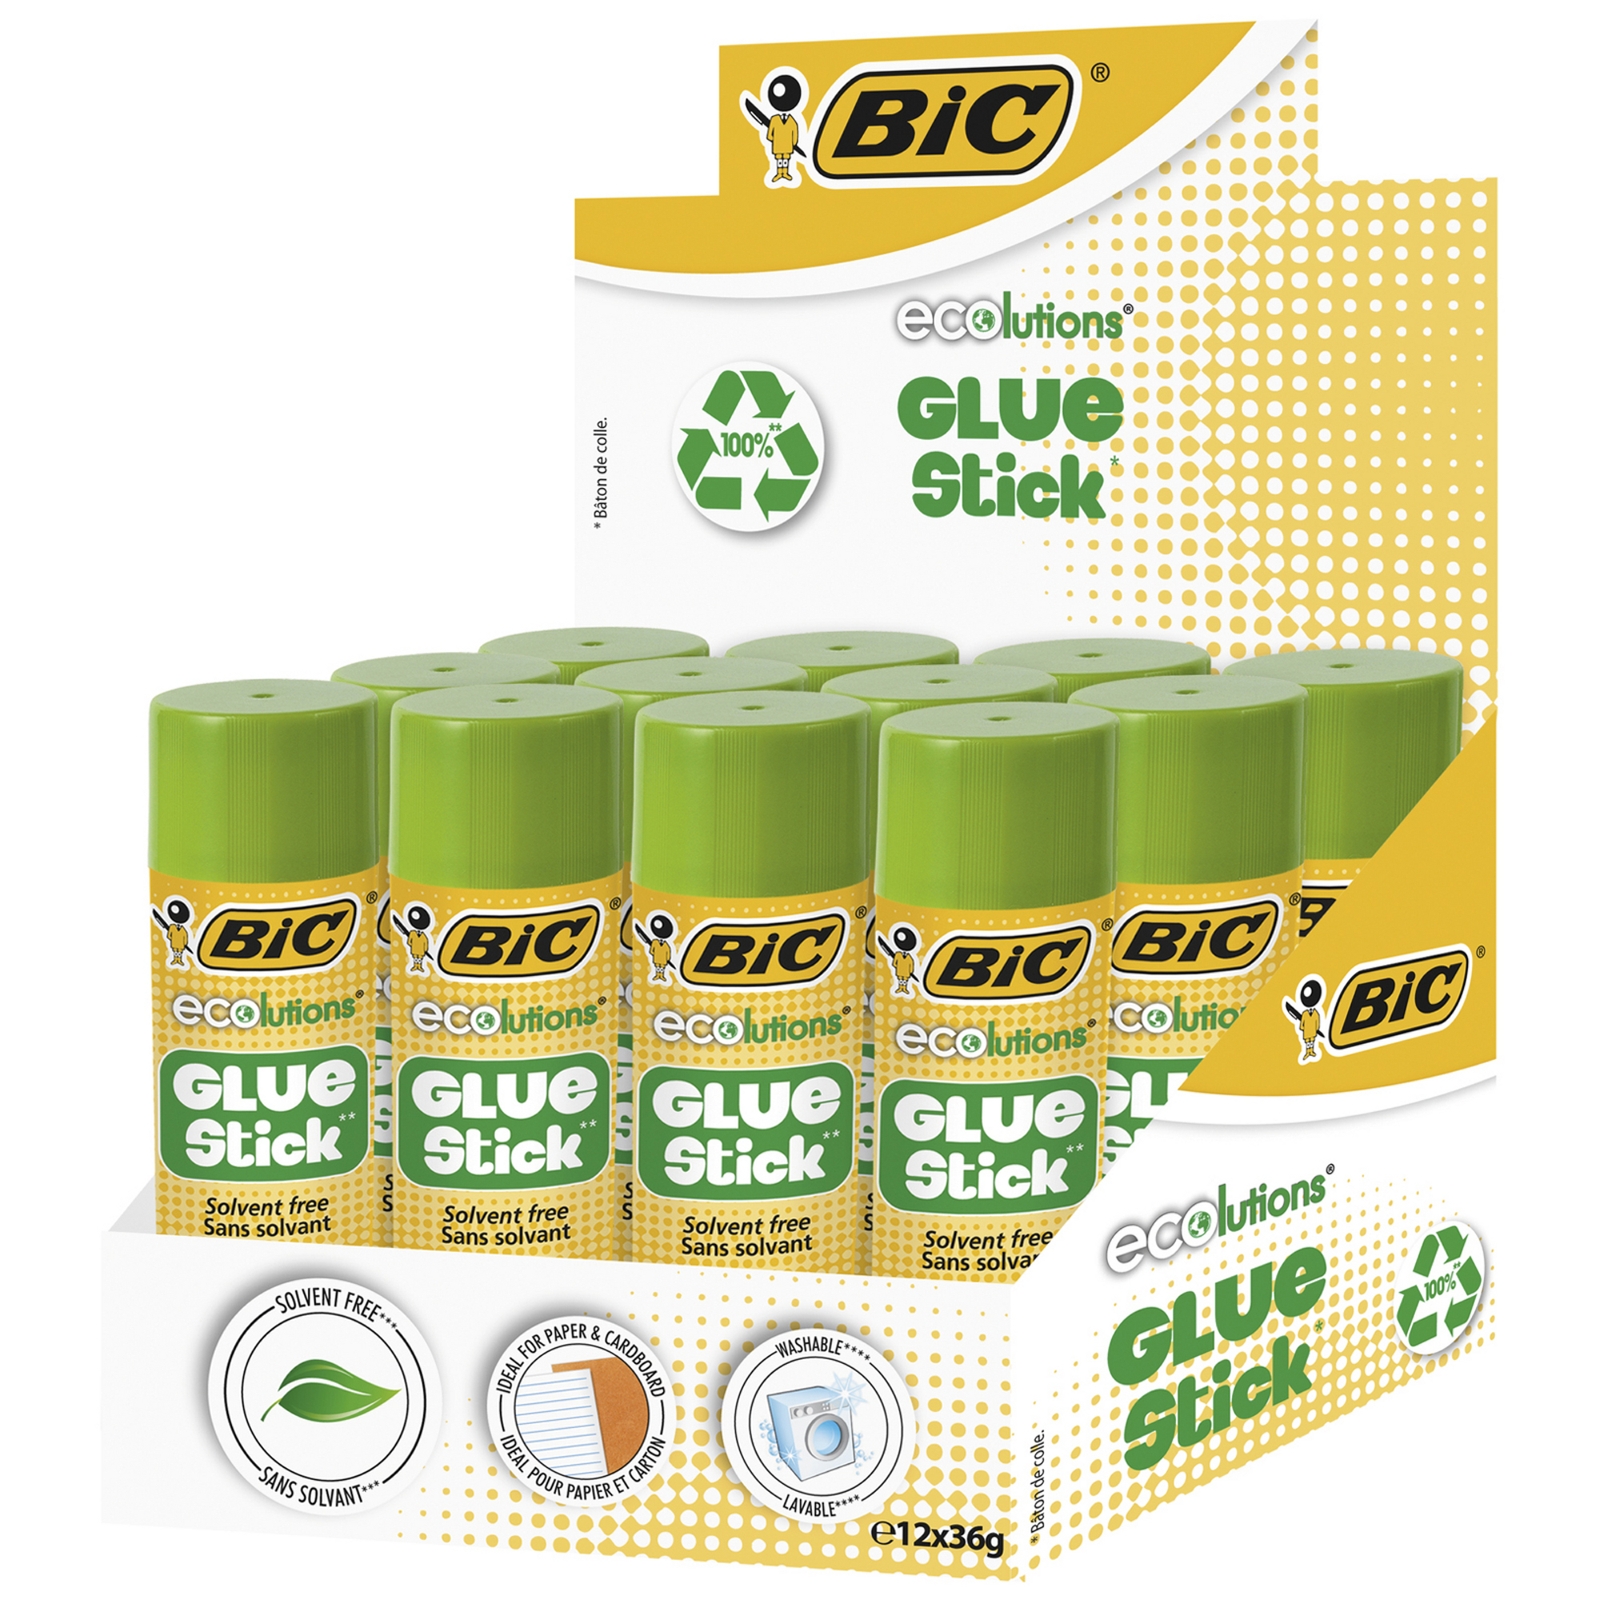 BIC ECOlutions 36g Glue Stick - Pack of 12